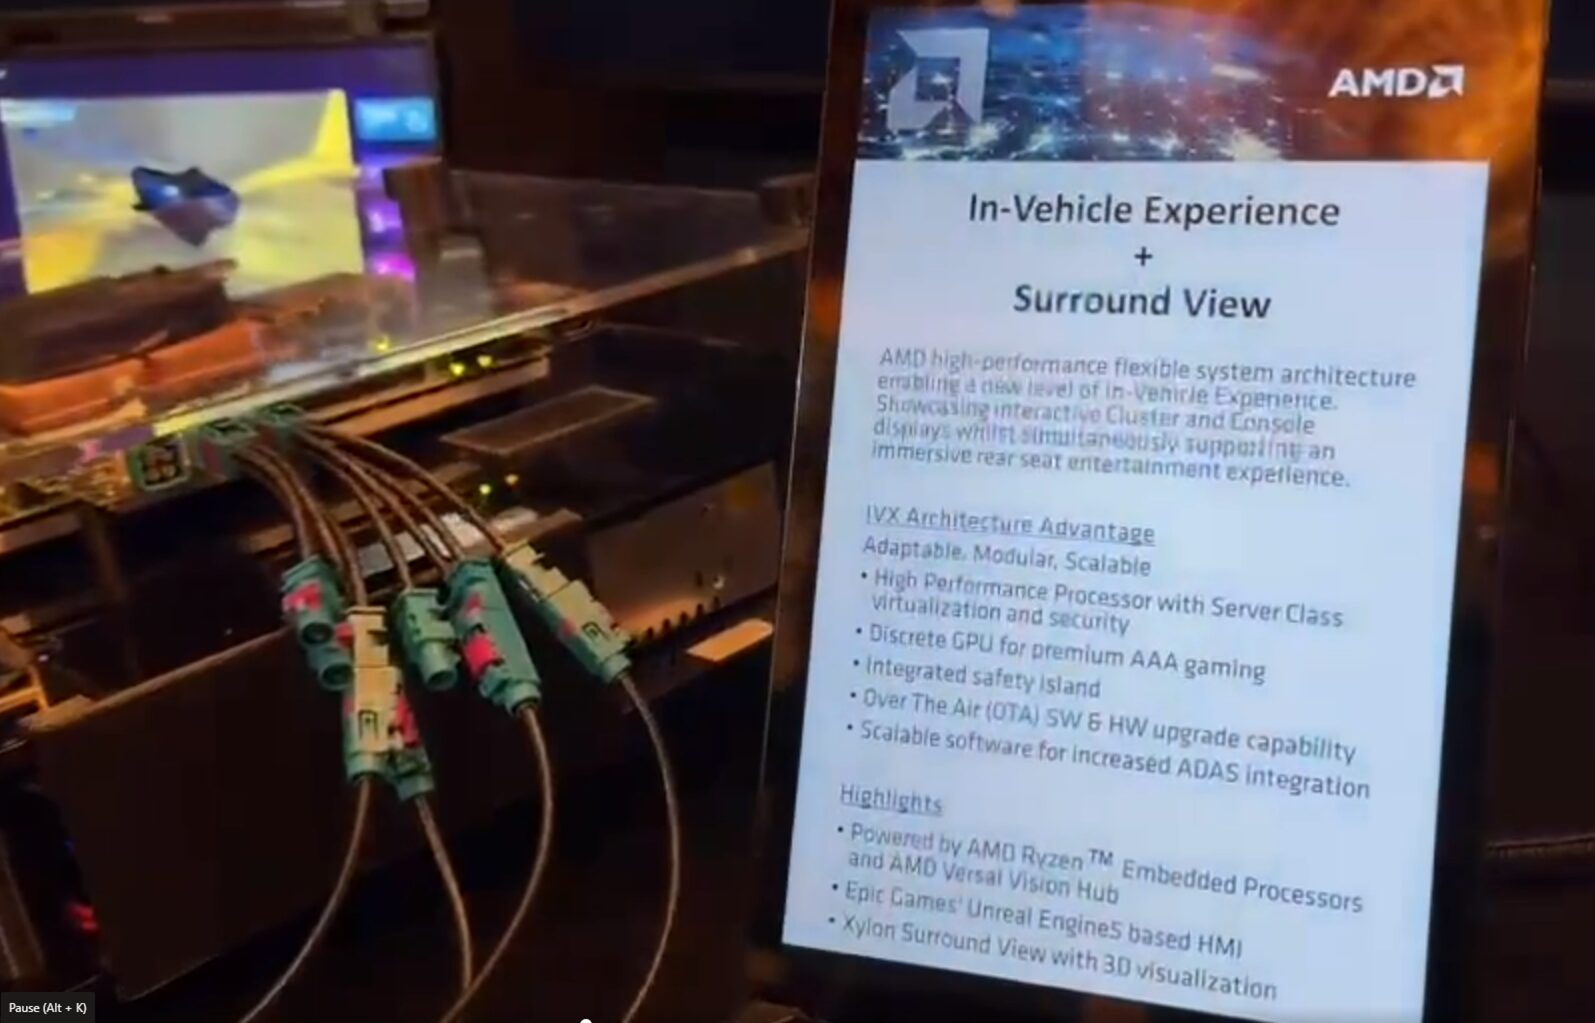 AMD In-Vehicle Experience + Surround View